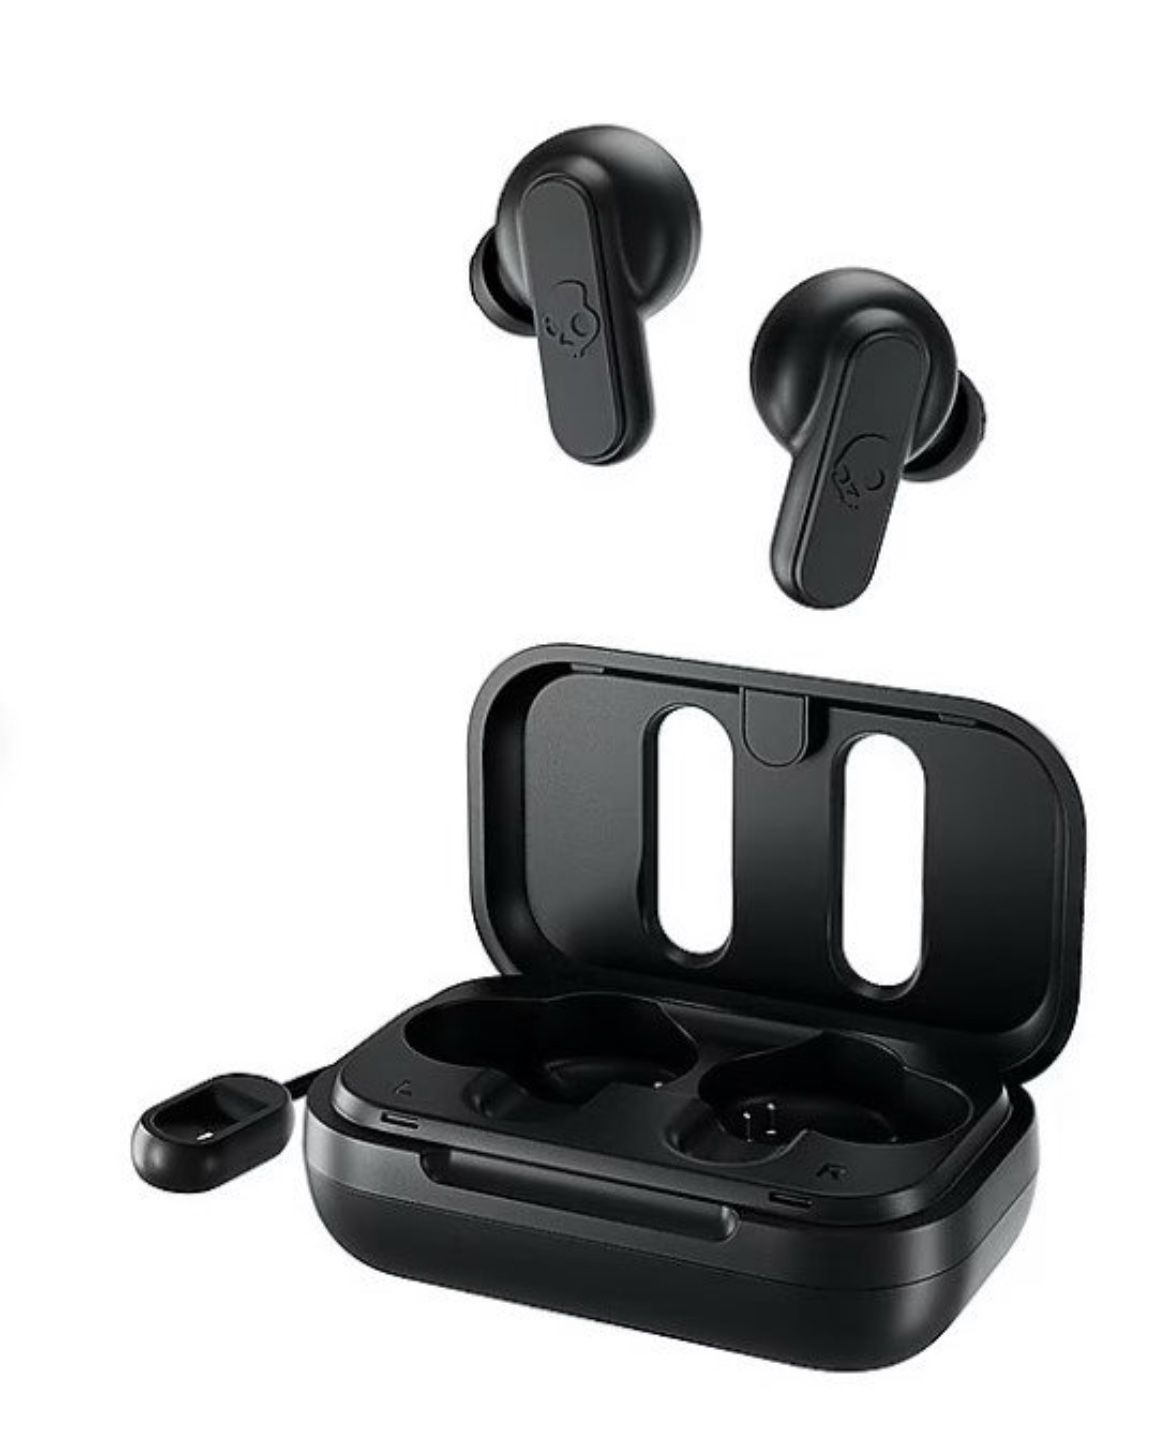 Skullcandy "Dime" Mini and Mighty True Wireless Earbuds(S2DMW-P740)